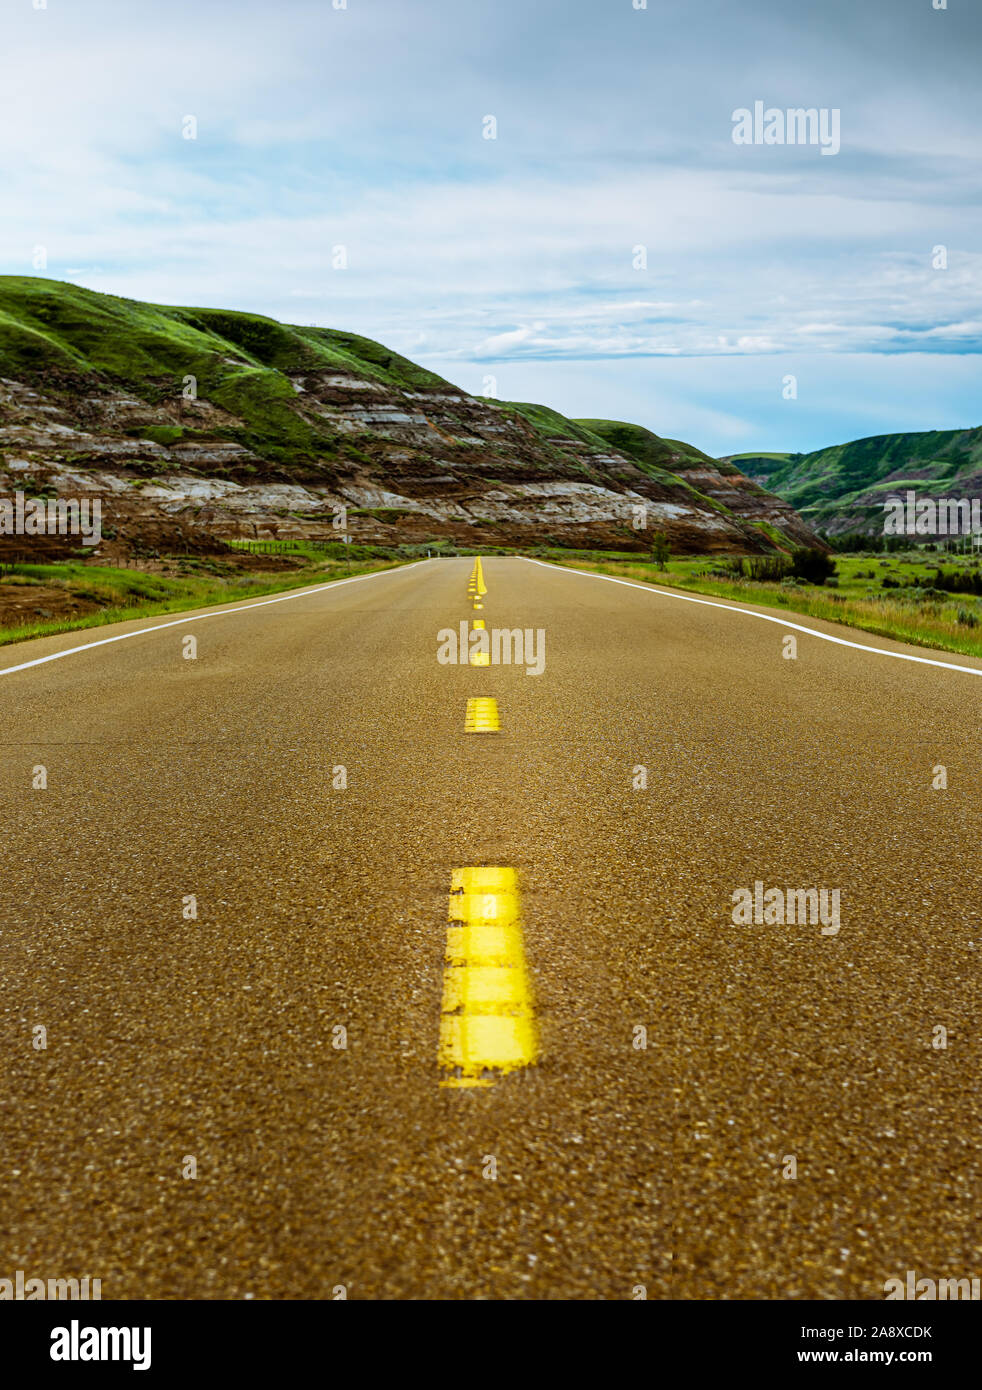 Middle of the road - Center Lane Drumheller, Alberta, Canada Stock Photo